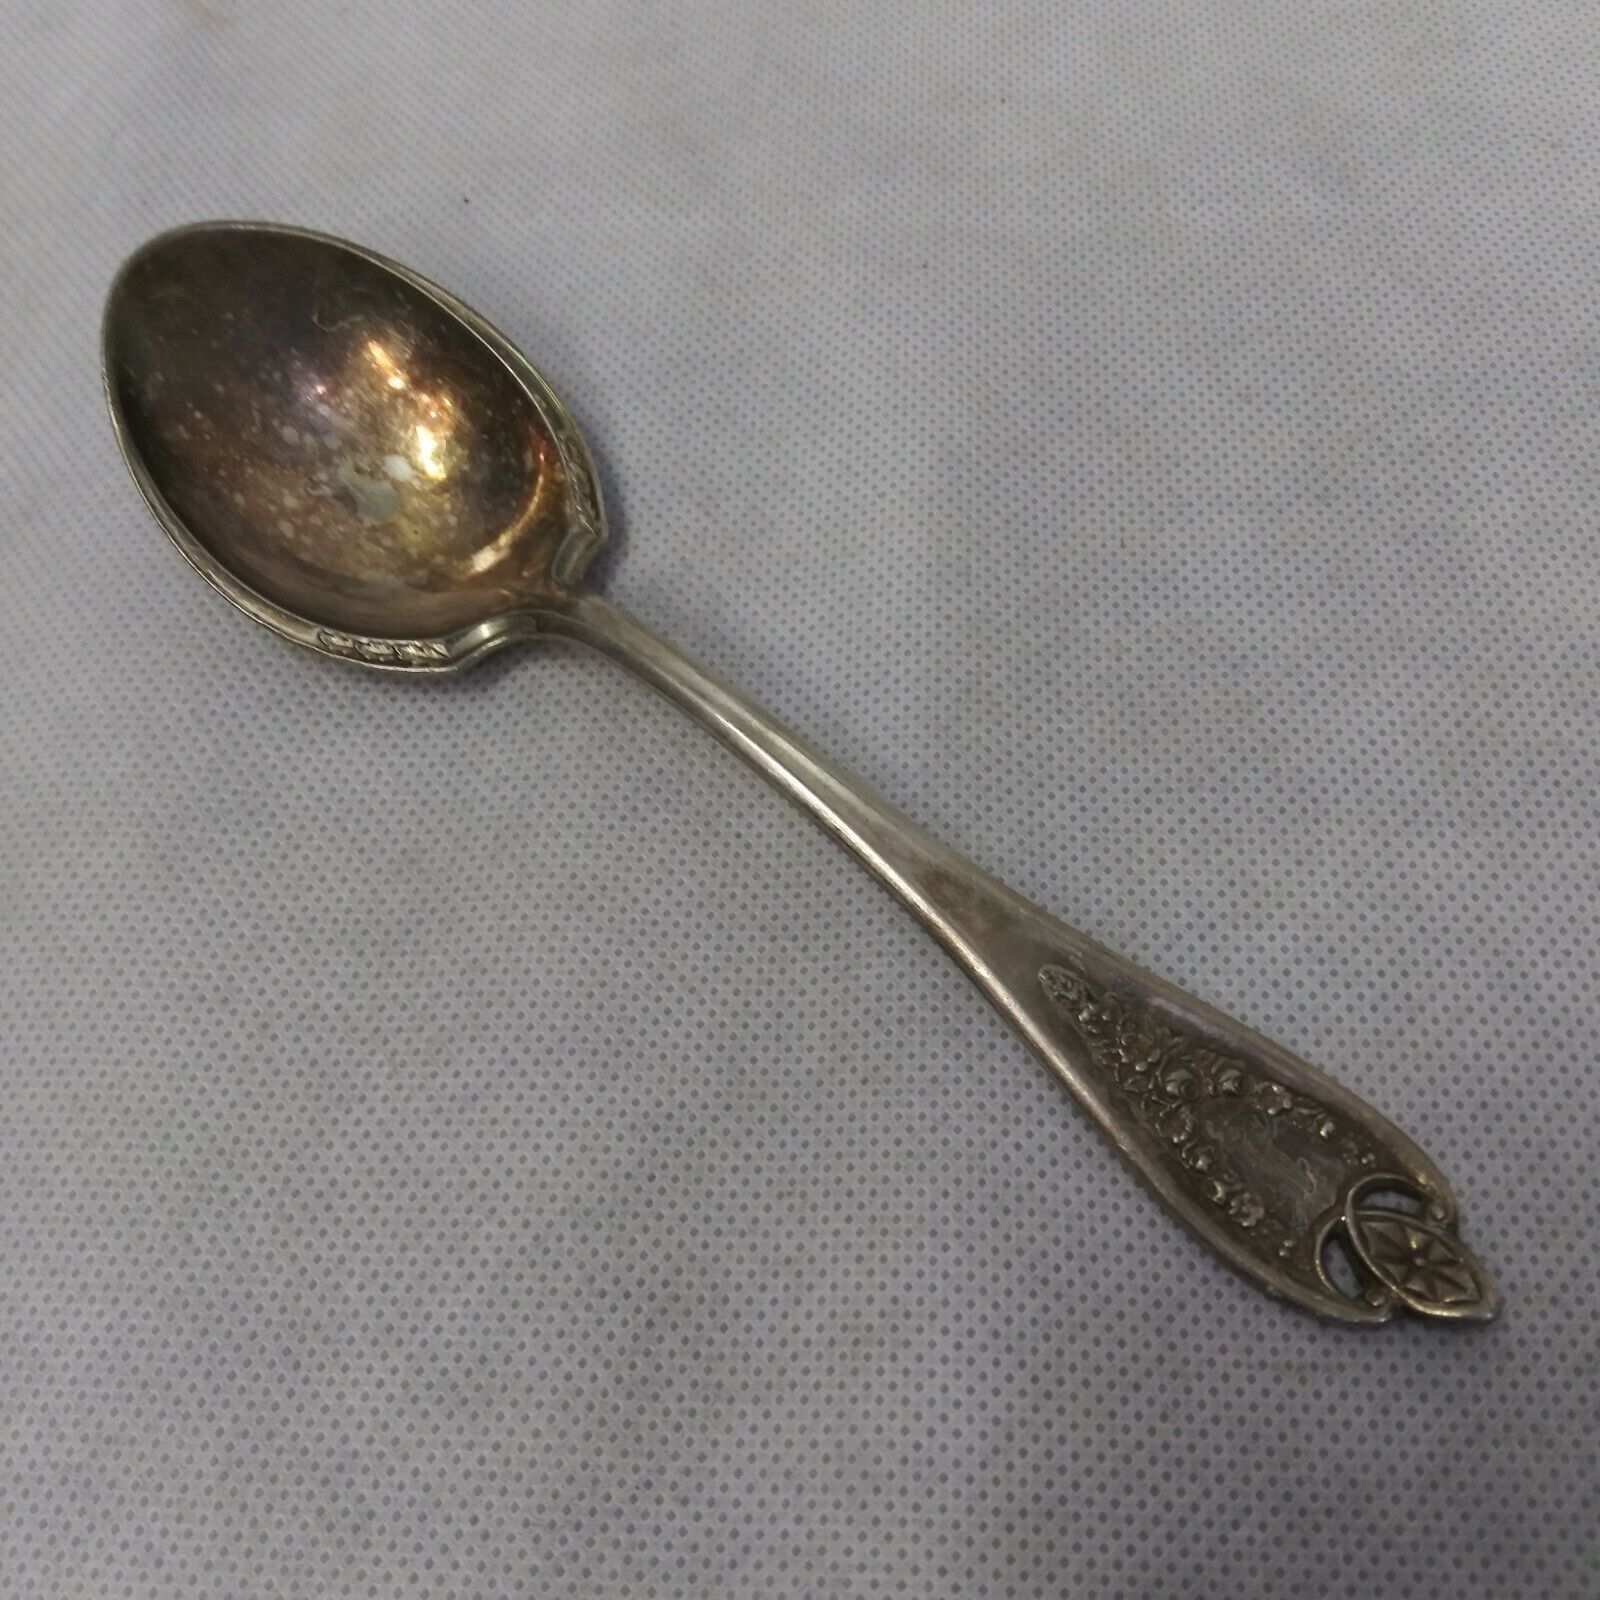 Rogers Bros 1847 Sugar Spoon Old Colony 1911 Silver Plated Int'l Silver Pierced - $6.95